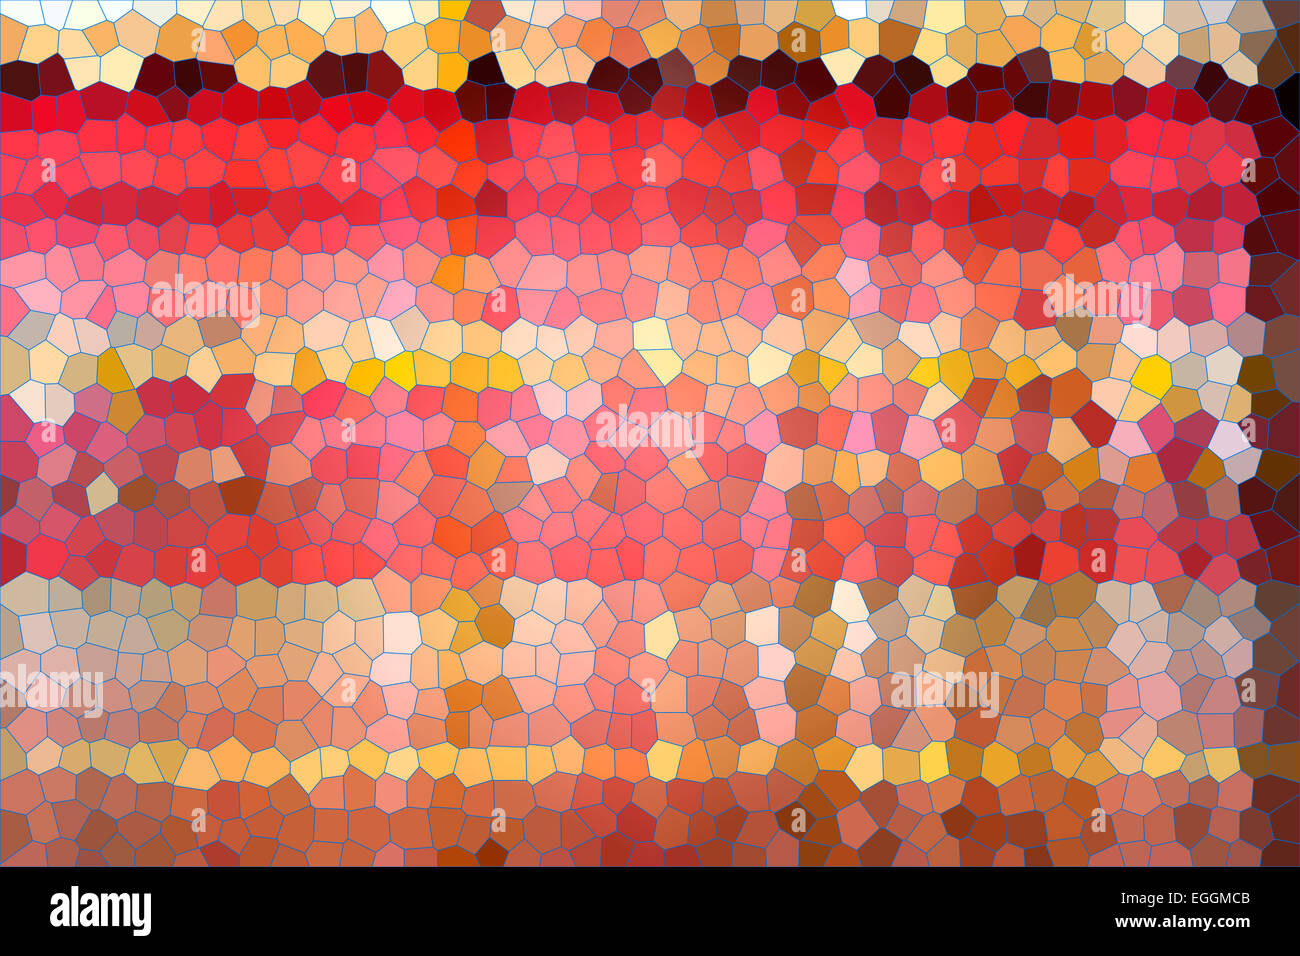 Abstract colorful background patterns. Stock Photo